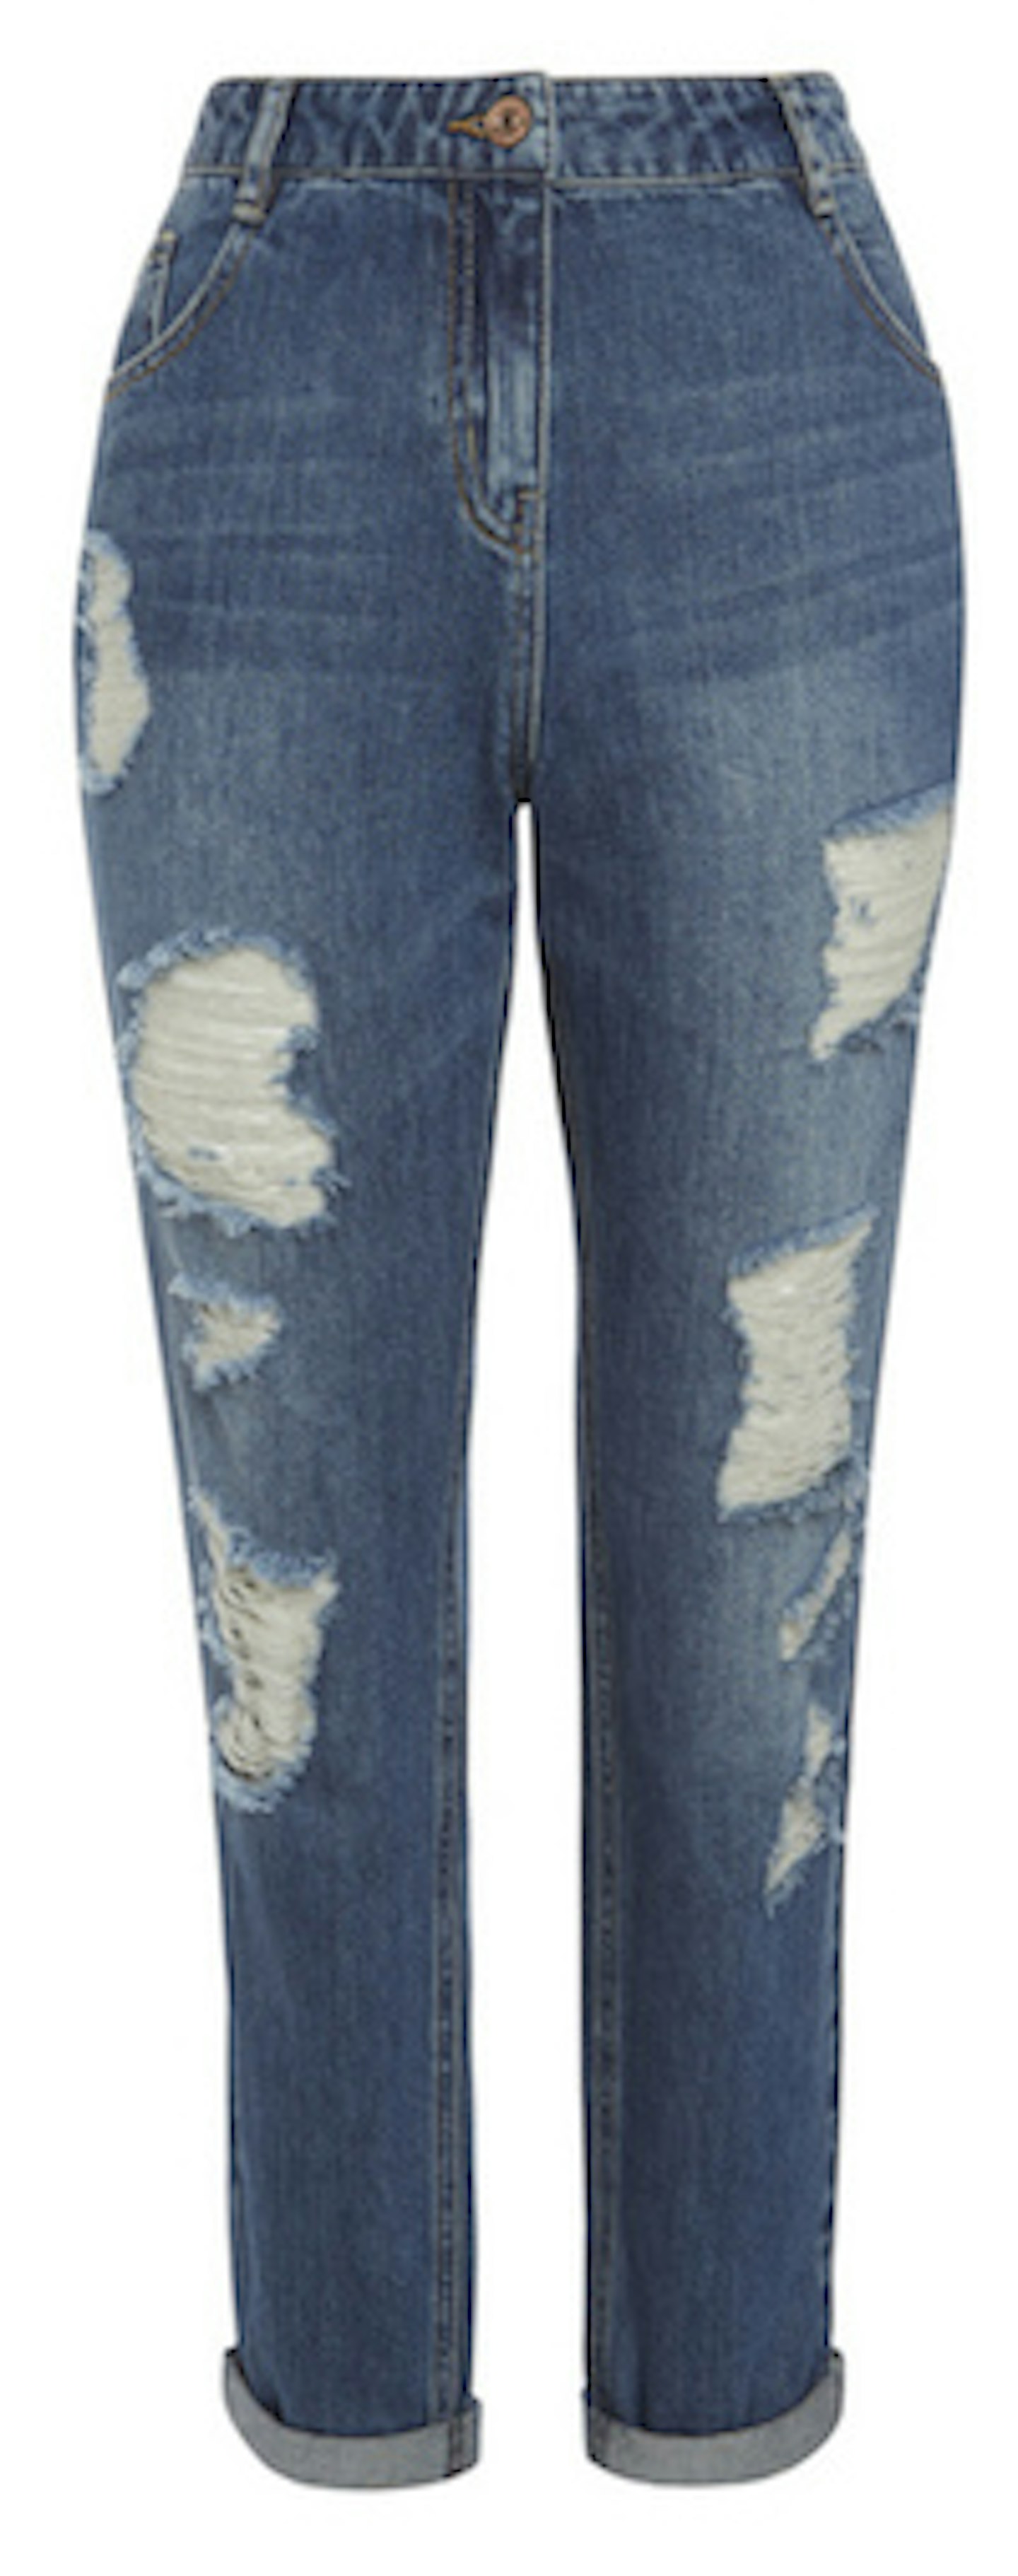 Distressed Jeans 18